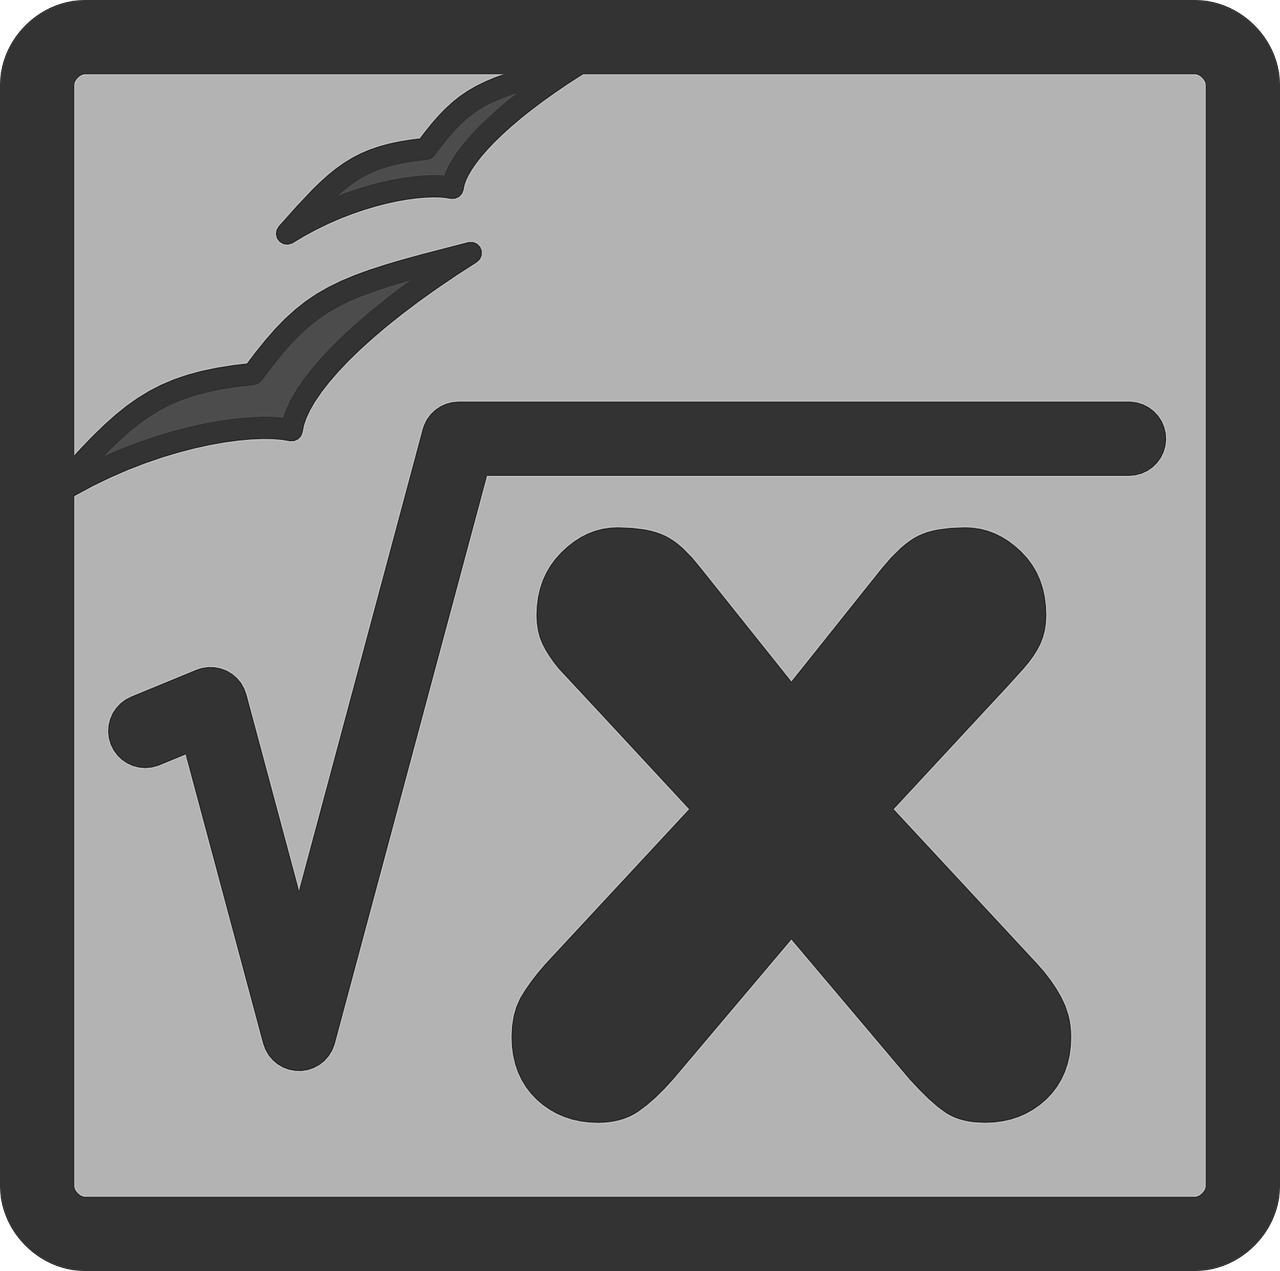 square root function icon free photo